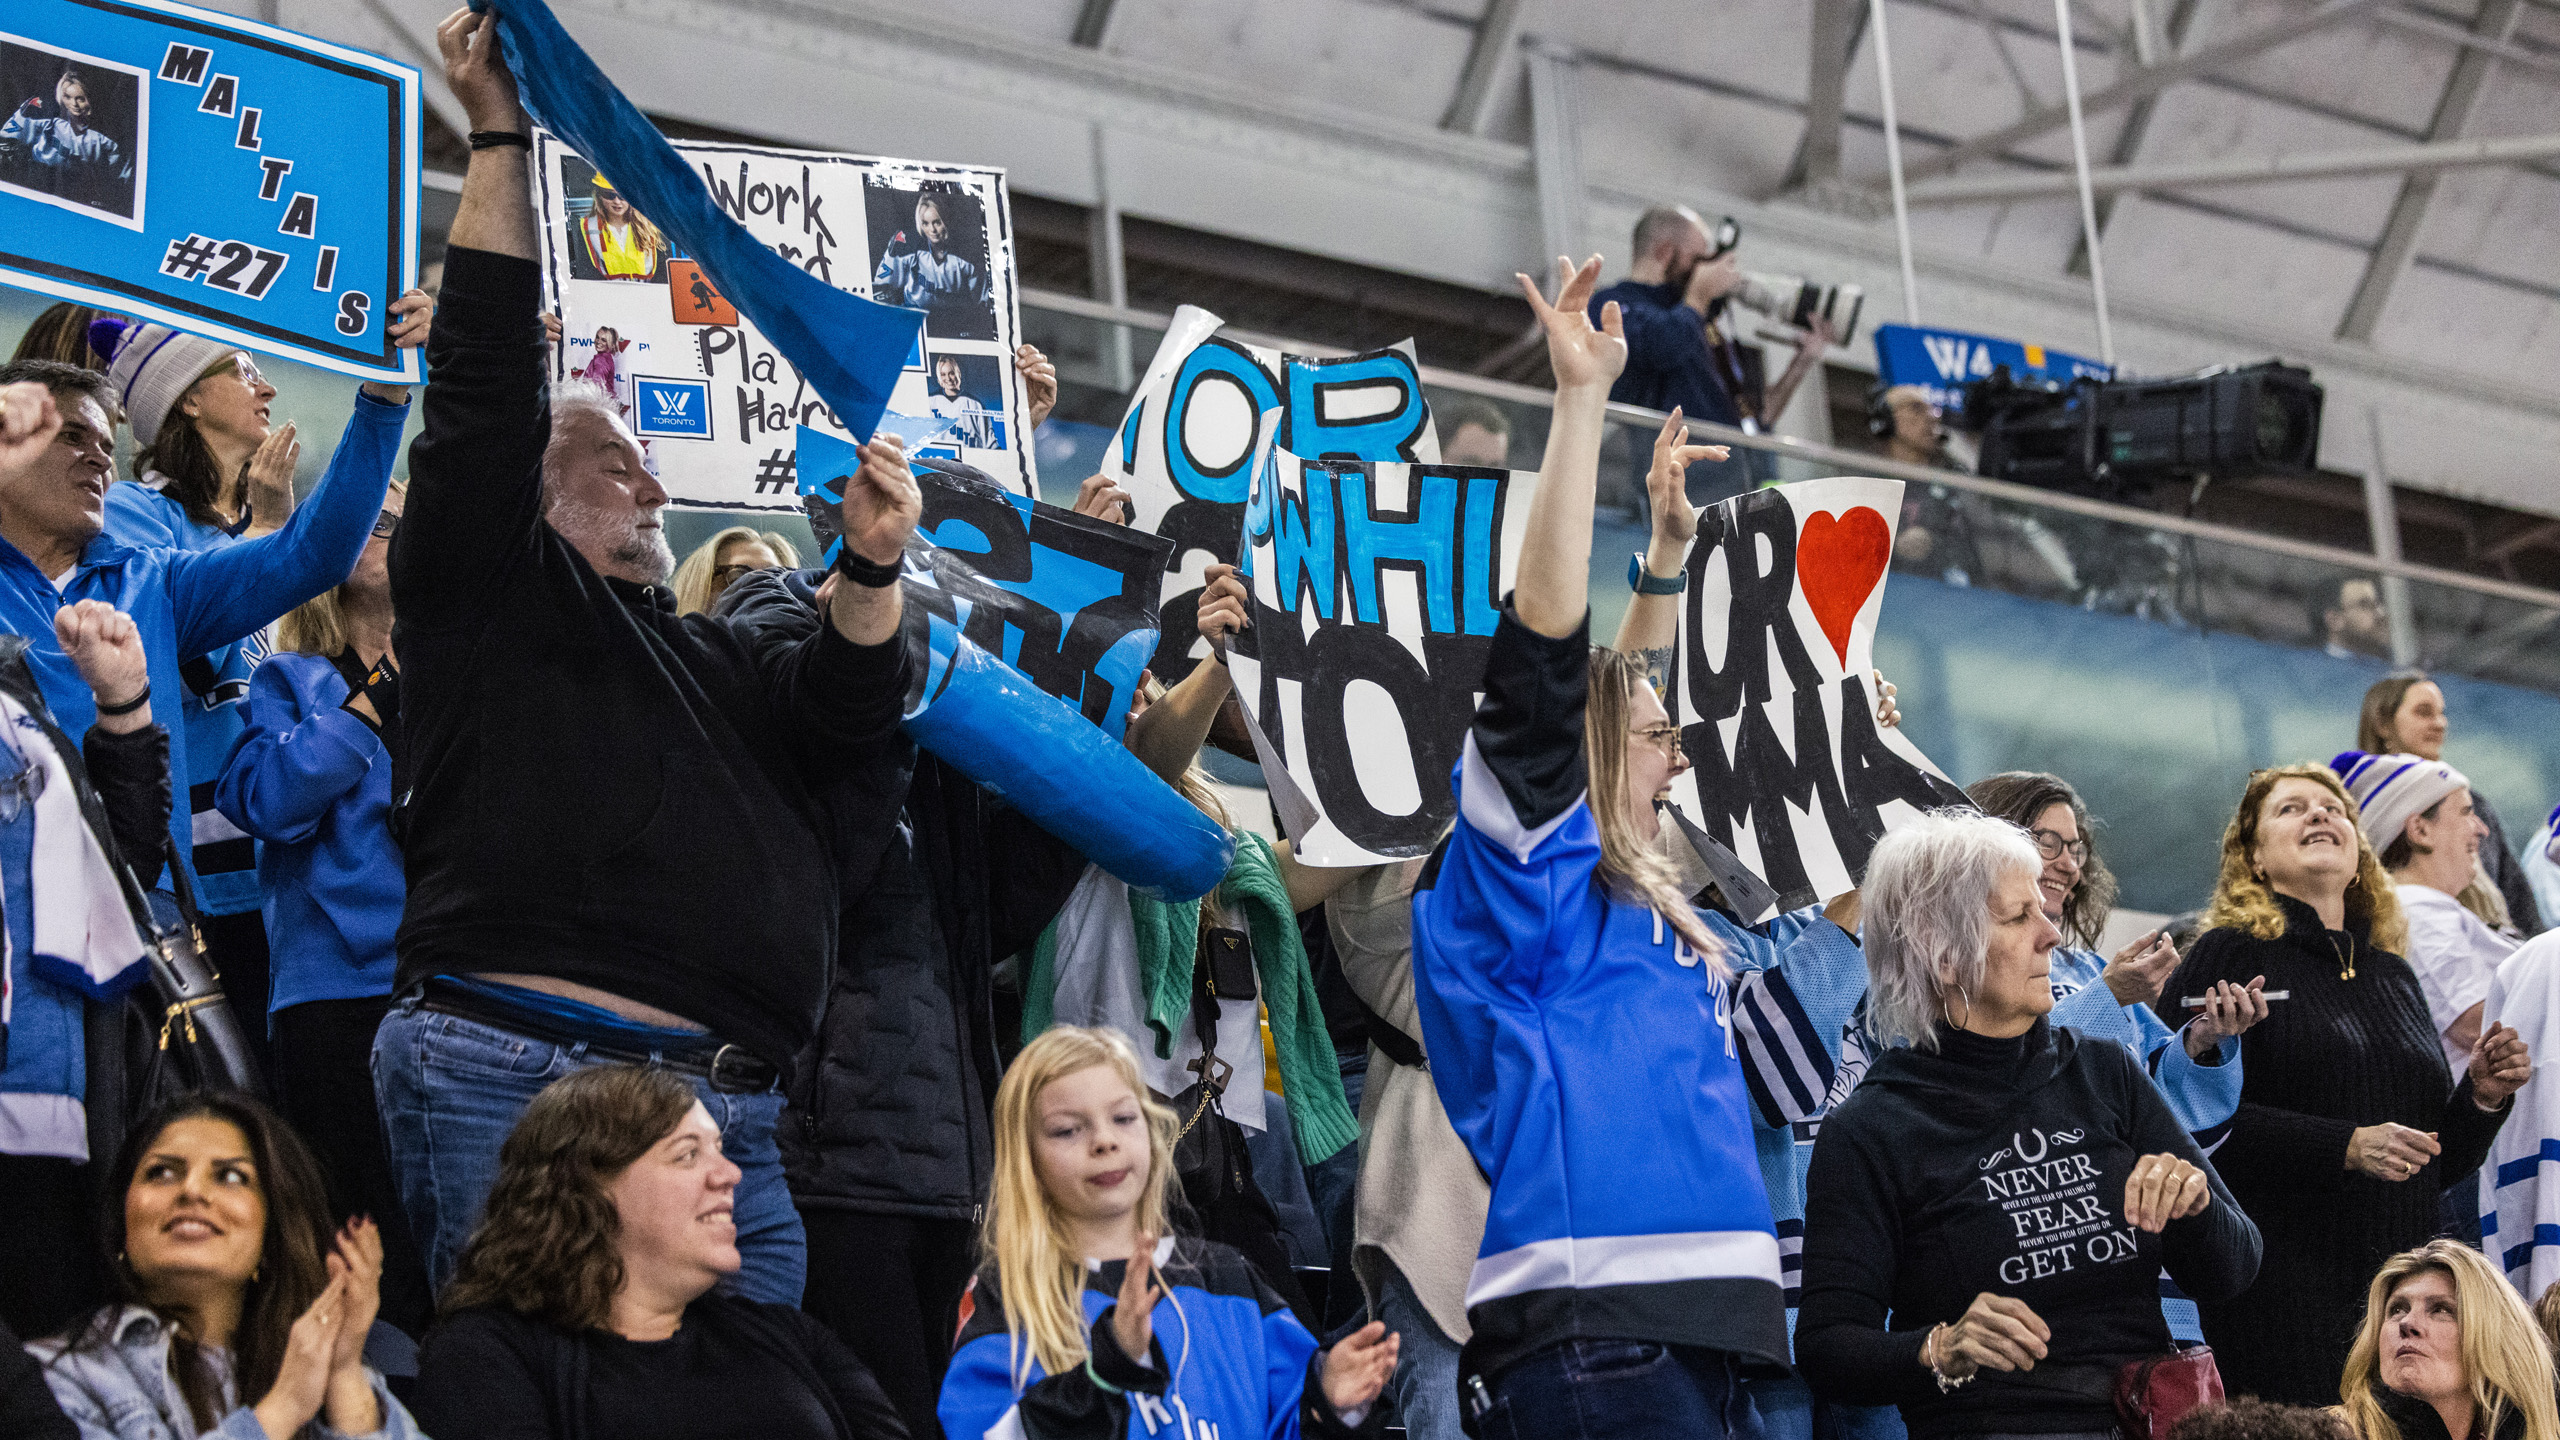 PWHL Toronto fans hold up signs in the stands